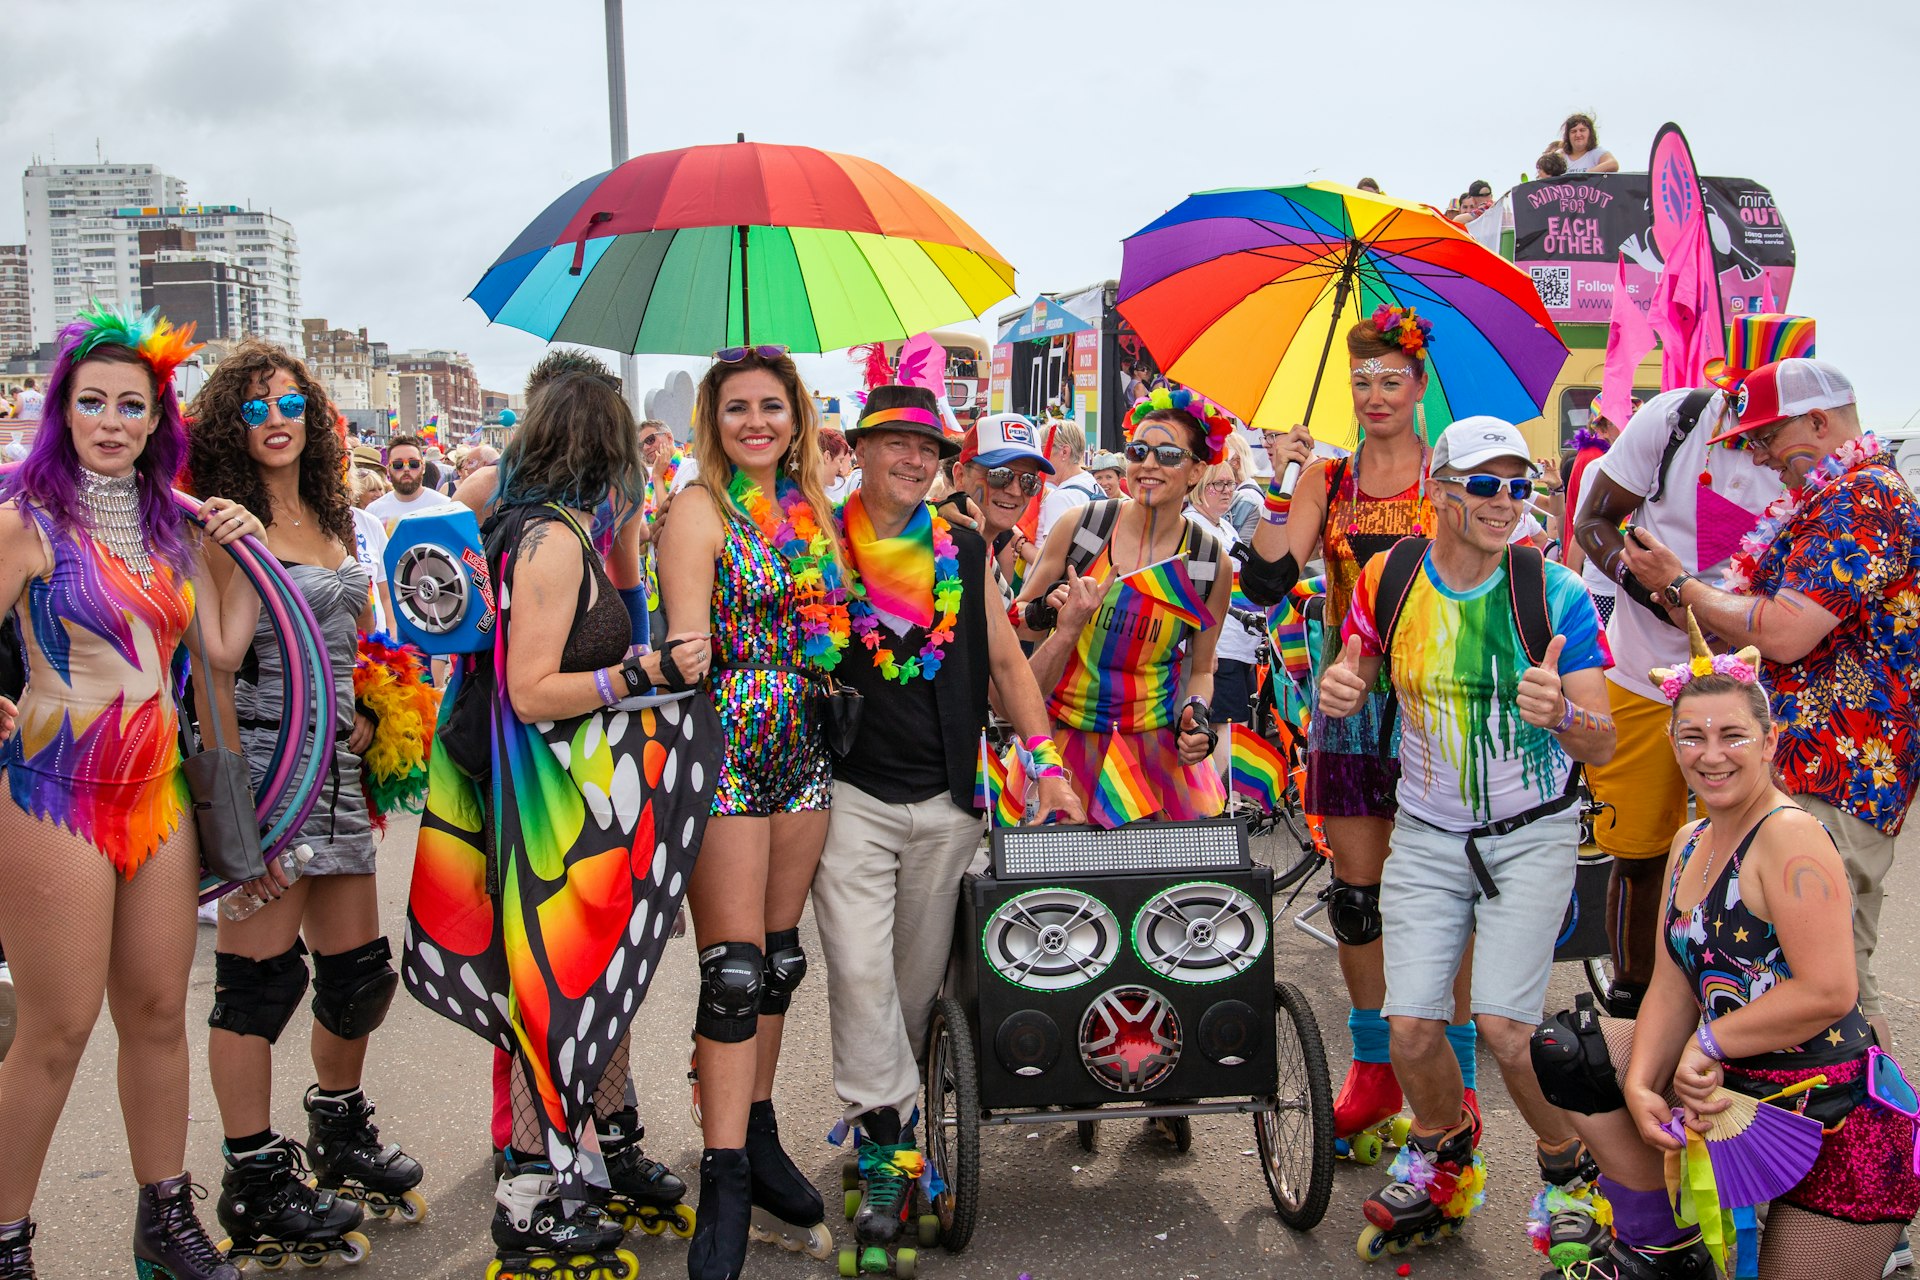 Revelers out for a fun time at the Brighton Pride Parade